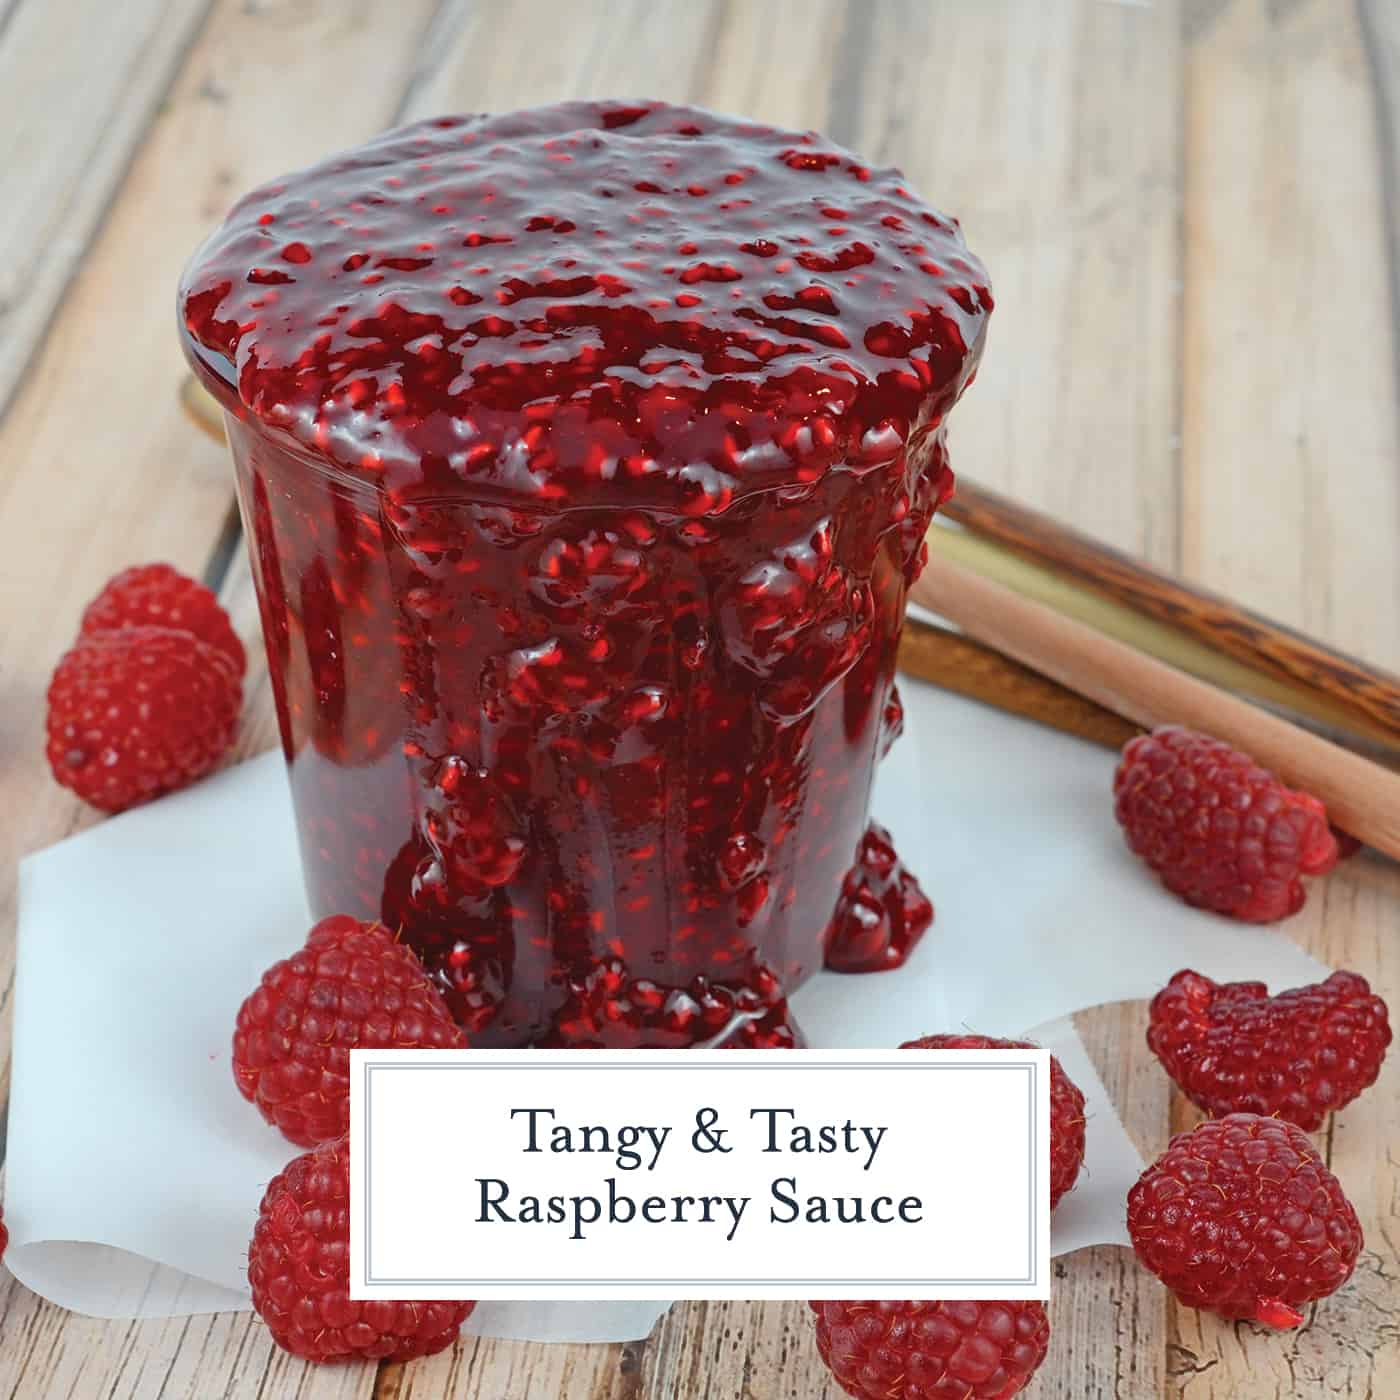 Raspberry Sauce is so versatile, use it on ice cream cheesecake, meringues, chocolate cake and more! And it only takes 5 ingredients and 20 minutes! #raspberrysauce #raspberrycoulis www.savoryexperiments.com 